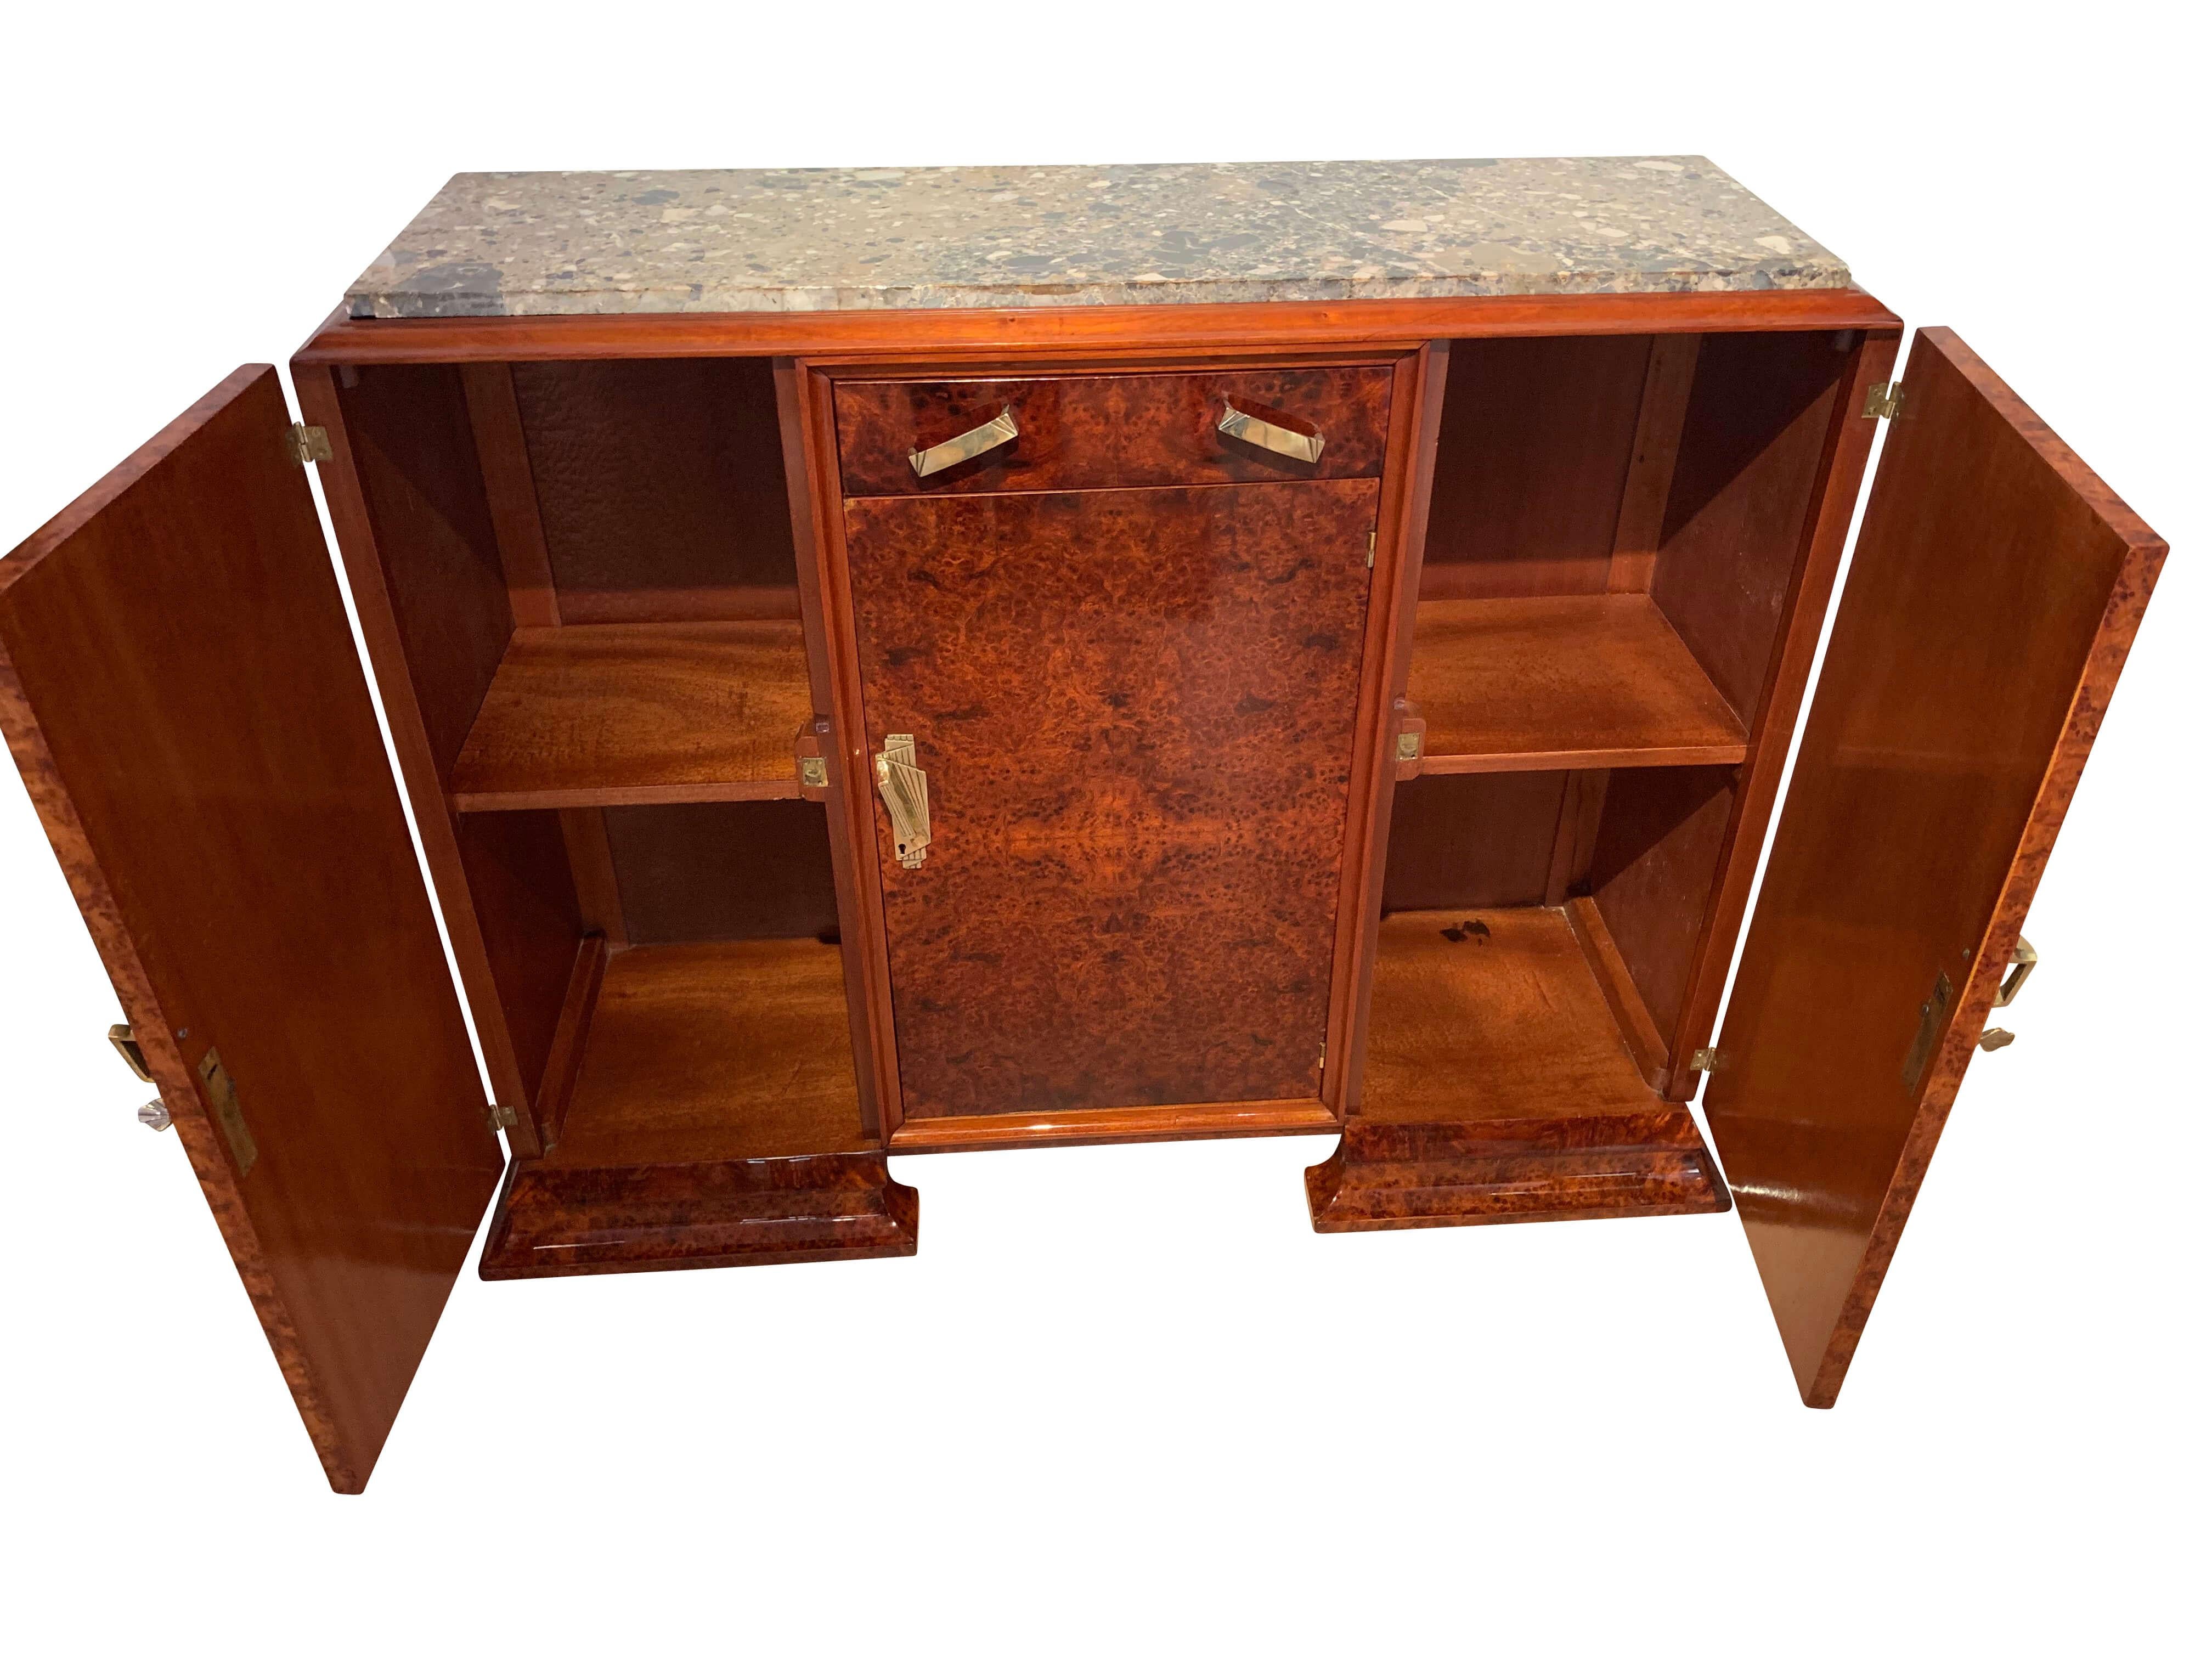 French Art Deco Sideboard, Walnut Roots Veneer, Marble, Brass, France, circa 1930